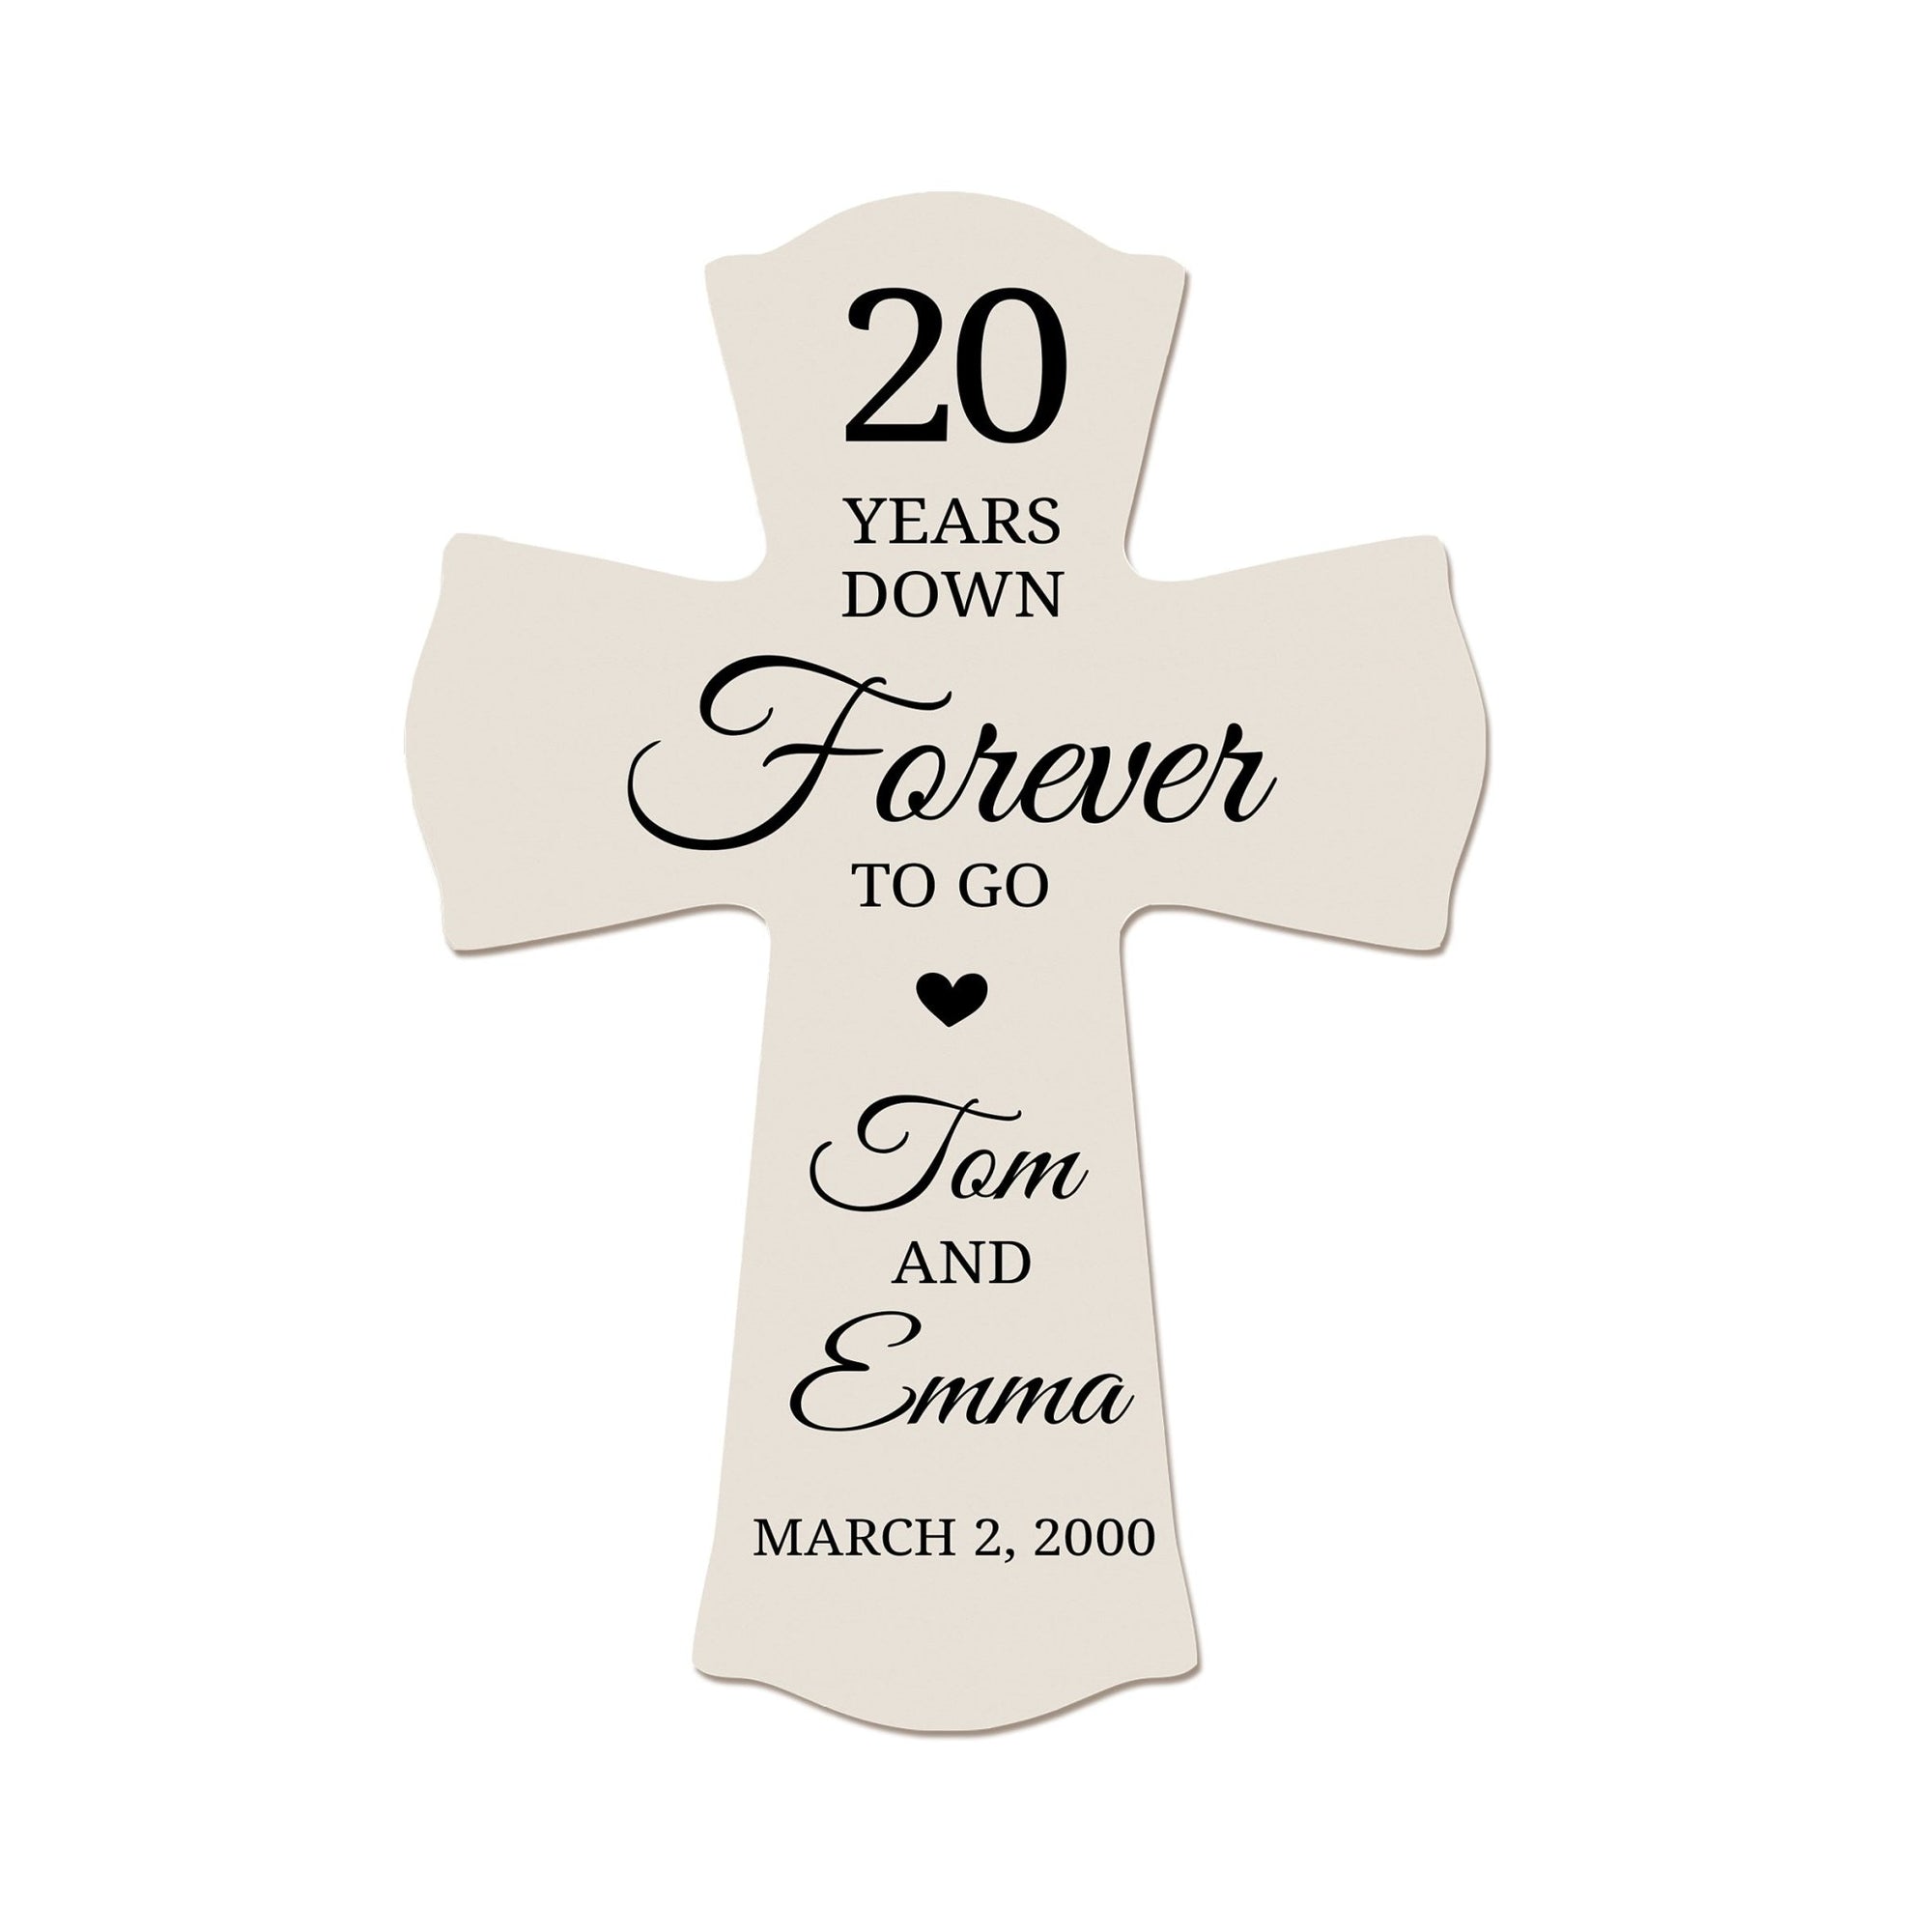 Unique Gifts for Couples - Customized Wall Cross for 20th Wedding Anniversary